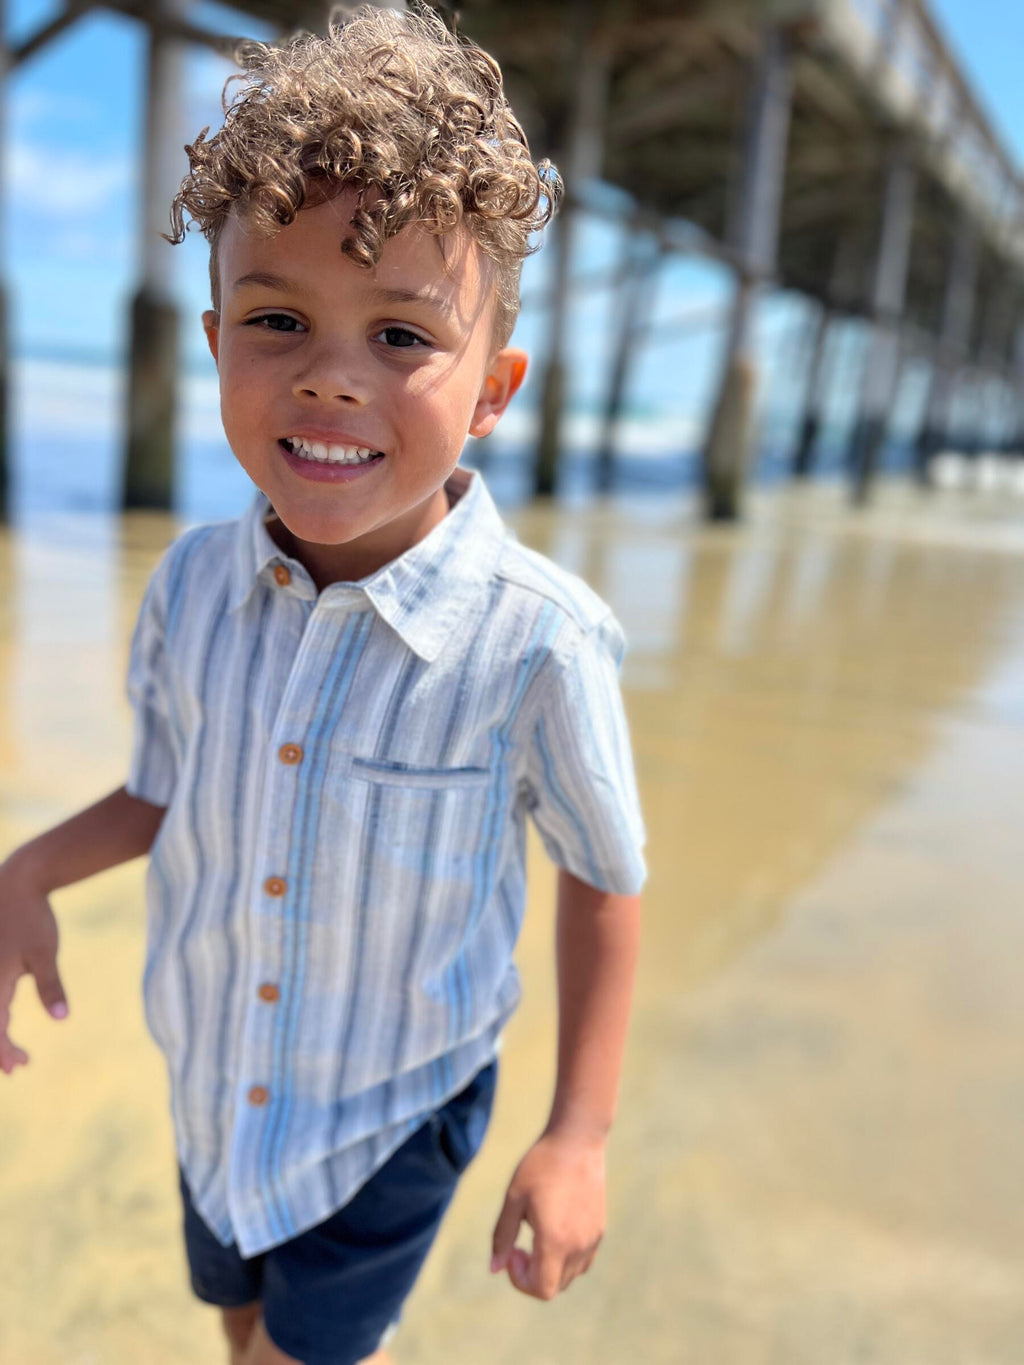 Brown curly hair boy wearing our blue stripe woven shirt and navy twill shorts walking on the beach.